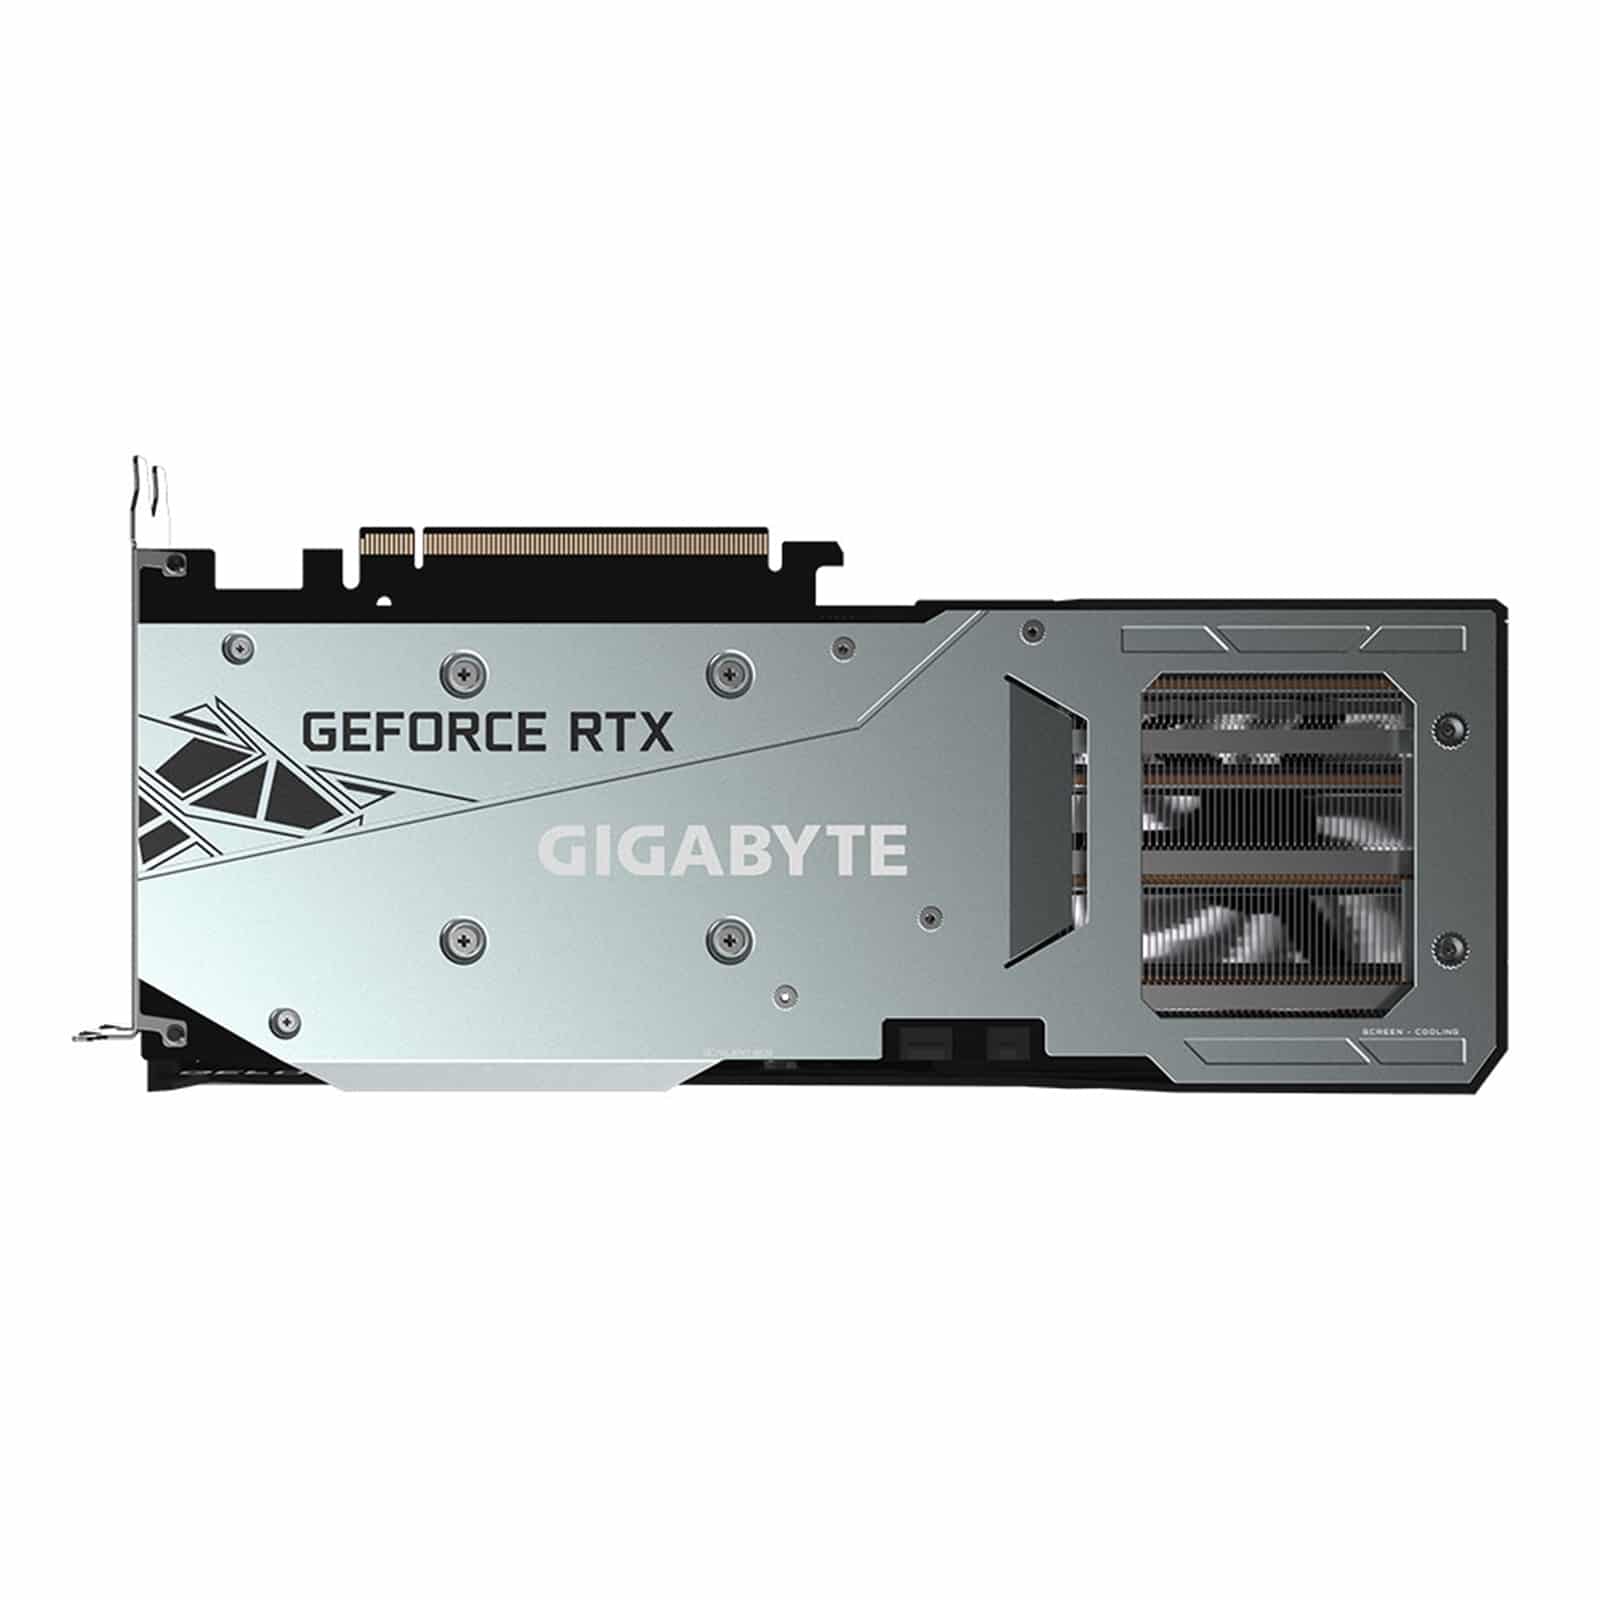 Gigabyte RTX 3060 Ti GAMING OC PRO LHR Backplate View